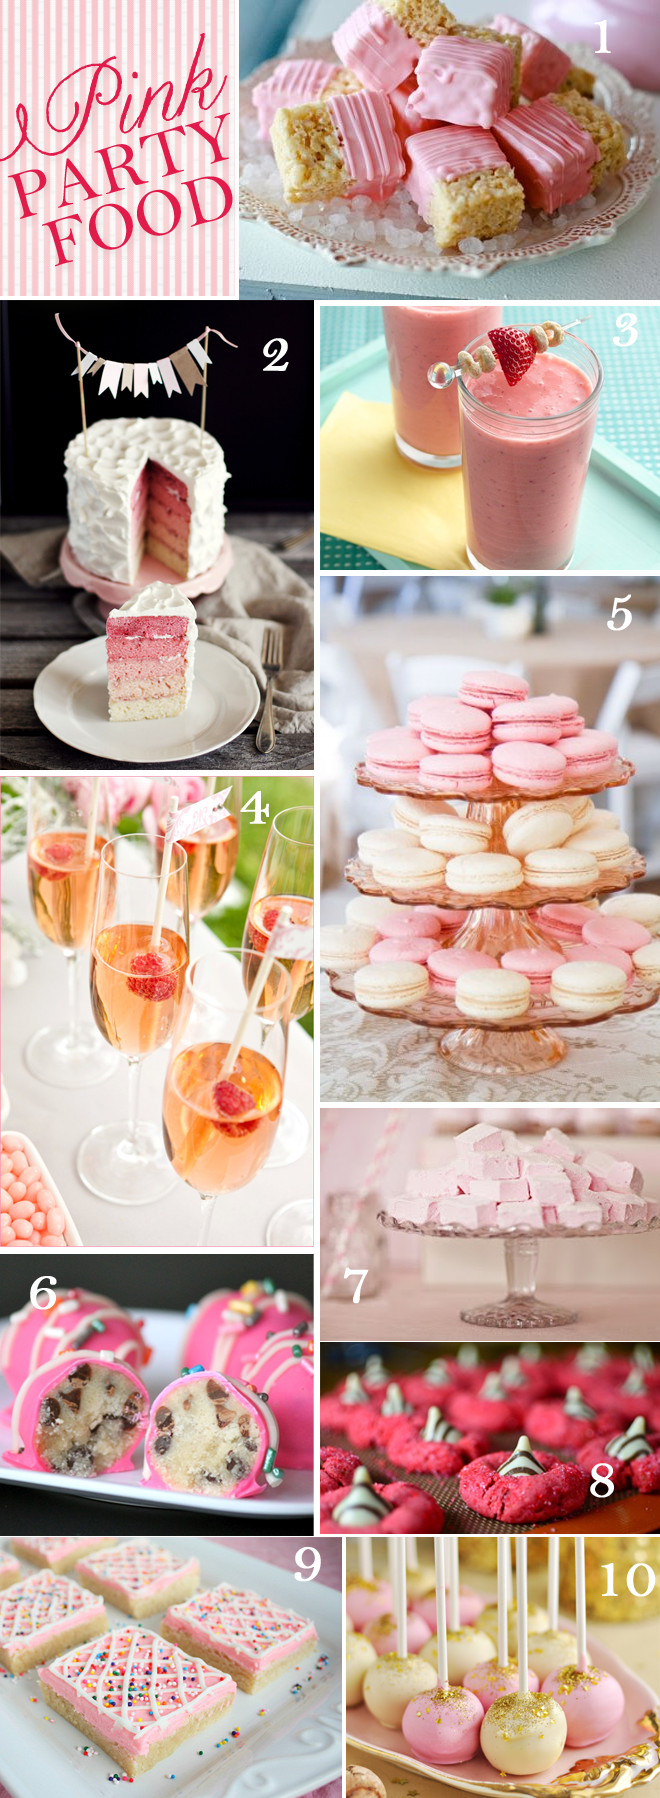 Pink Party Food Ideas
 10 Pink Party Foods Drinks I have a pinkalicous